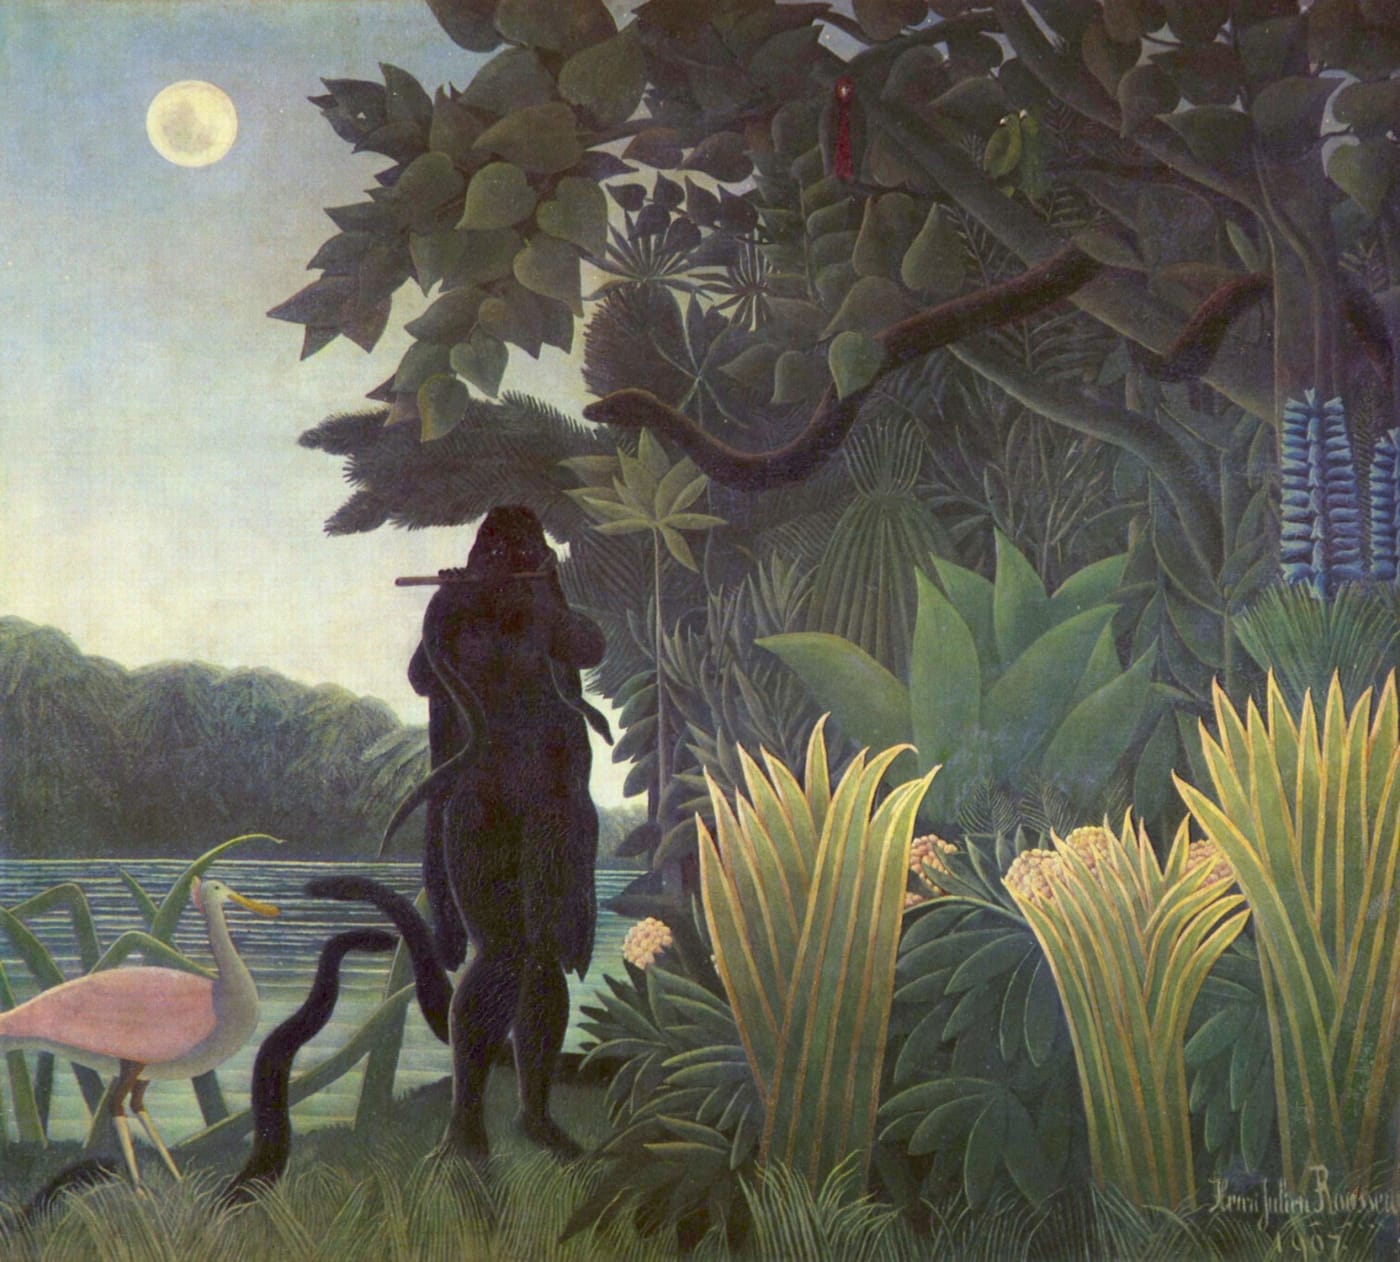 The Snake Charmer by Henri Rousseau